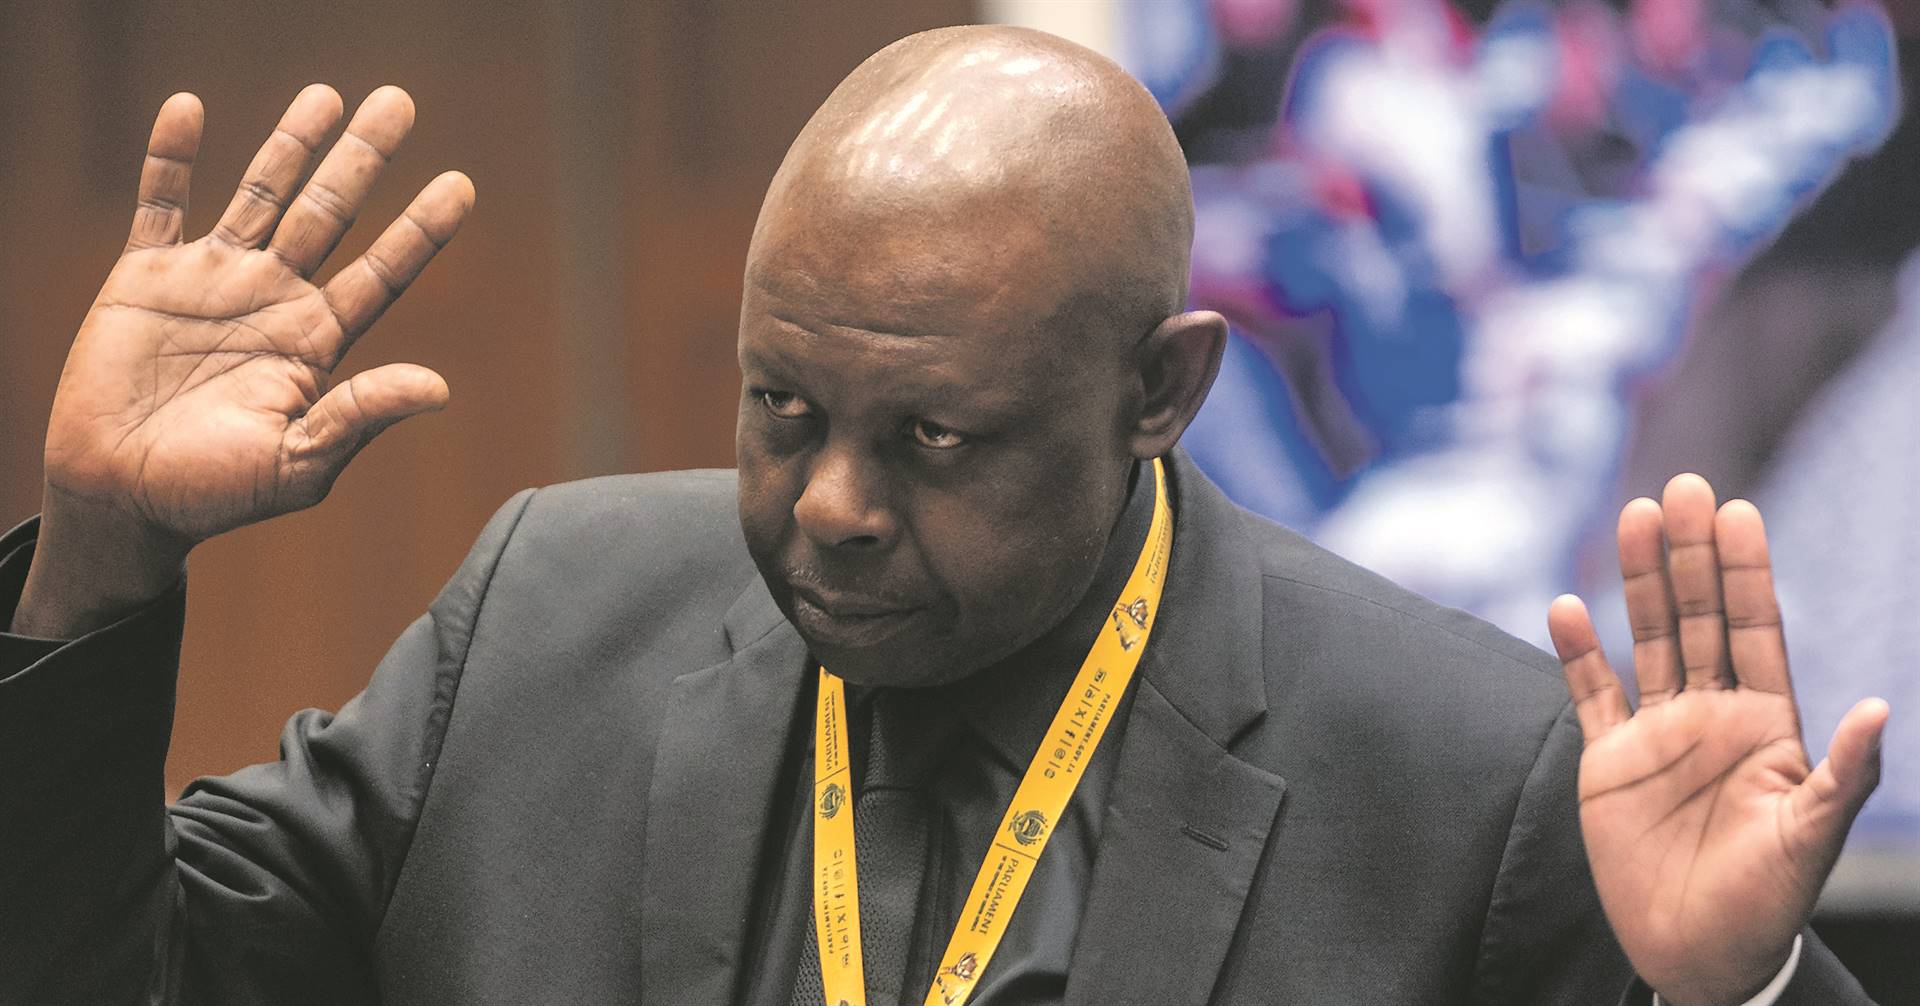 News24 | 'Irrational and unreasonable': Hlophe's designation to JSC 'threatens public confidence' in judges